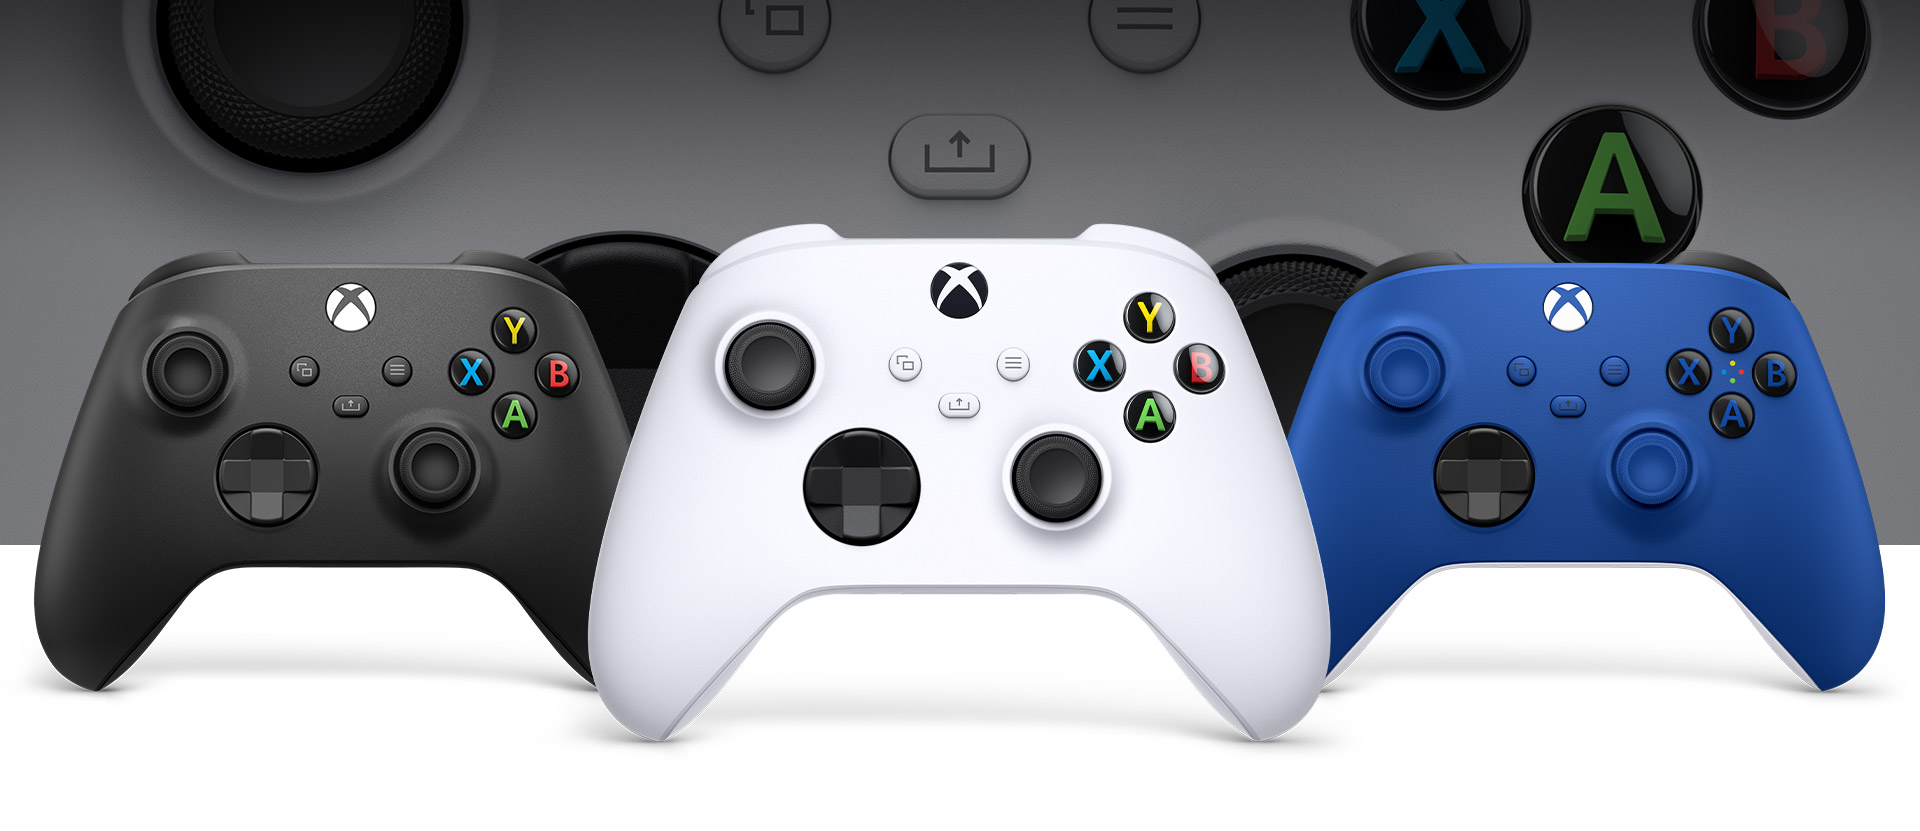 Xbox Robot White controller in front with the Carbon Black on left and Shock Blue on right